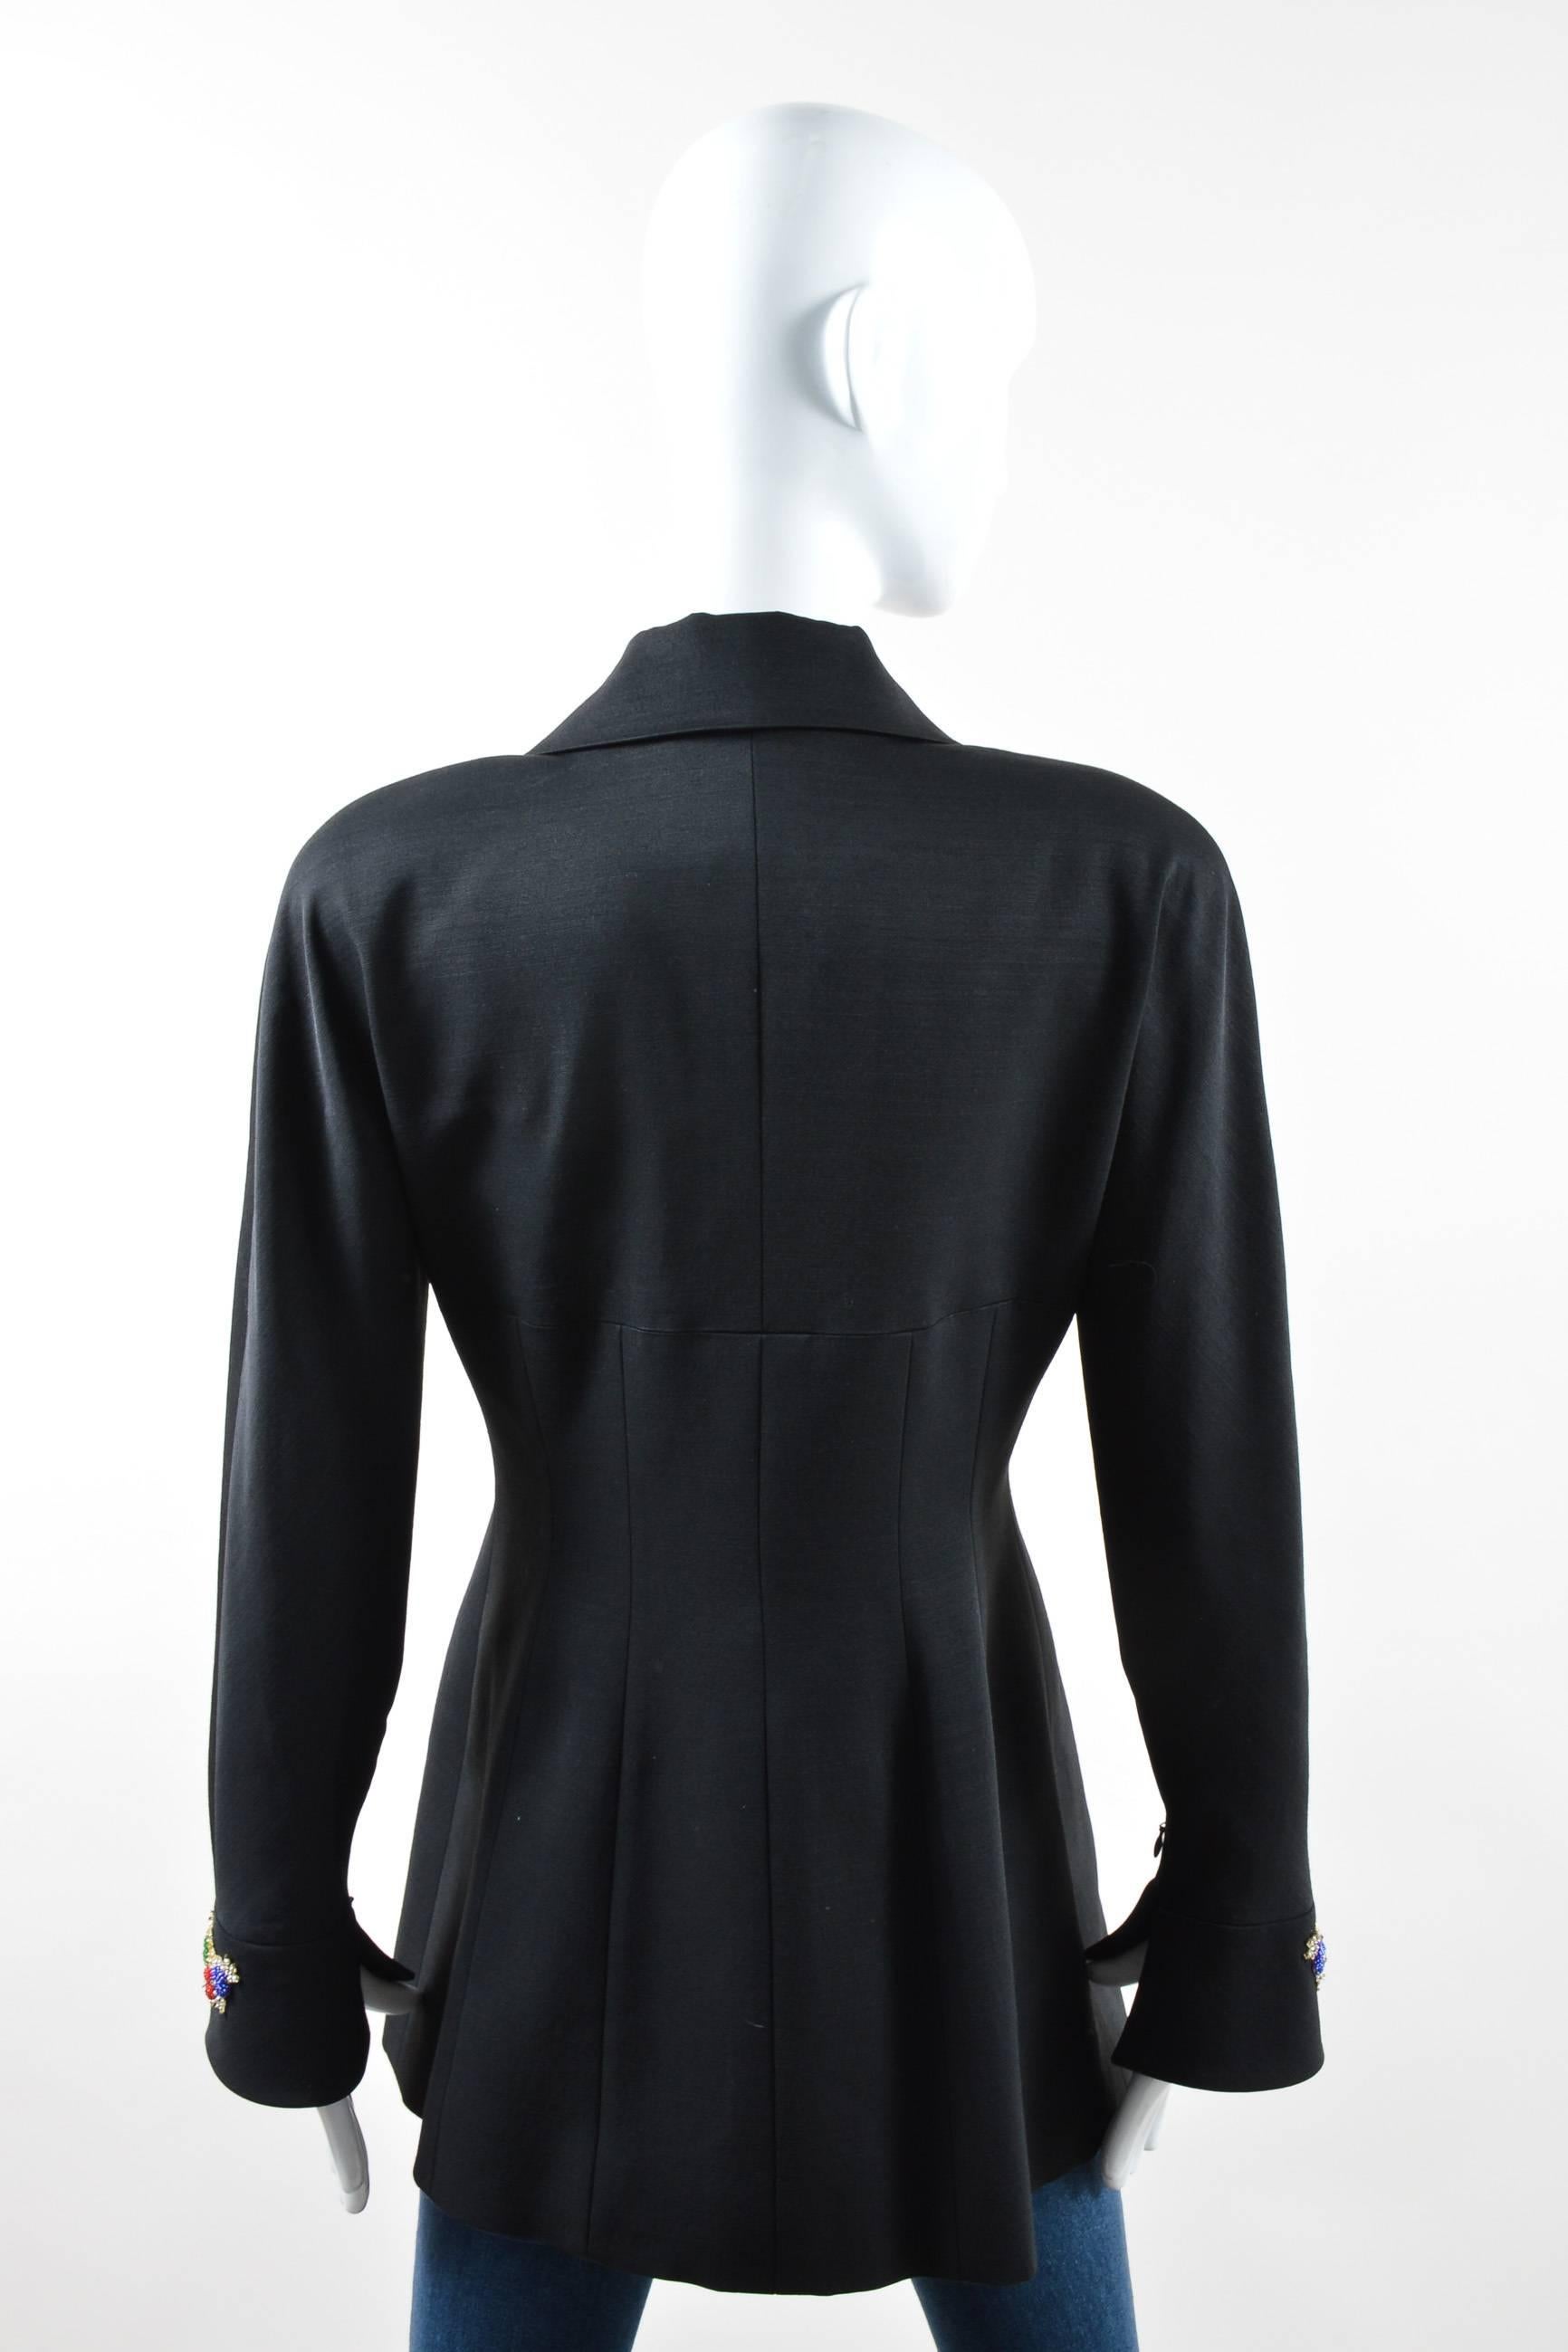 Vintage, tailored blazer. Black wool blend. Long sleeves with bell cuffs & zip closure. Oversized notch lapel. Asymmetrical hemline. Embroidered appliques with beading on sleeve cuffs & front bodice. Padded shoulders. Conceal snap button